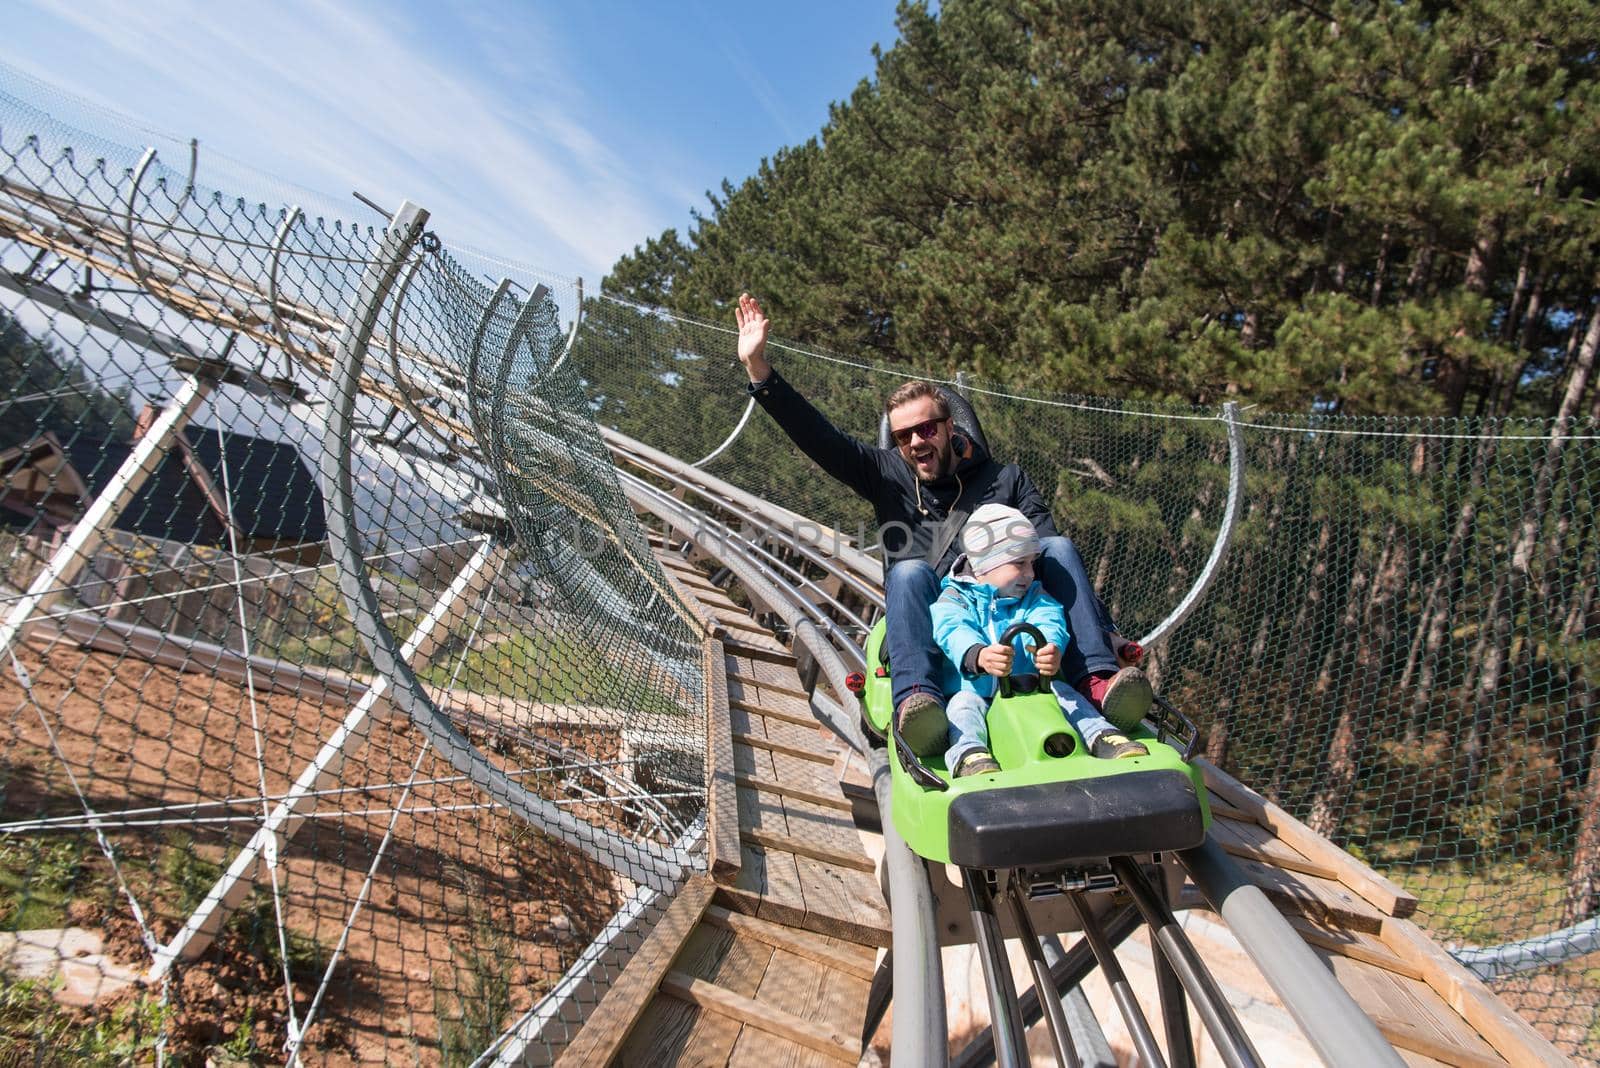 father and son enjoys driving on alpine coaster by dotshock